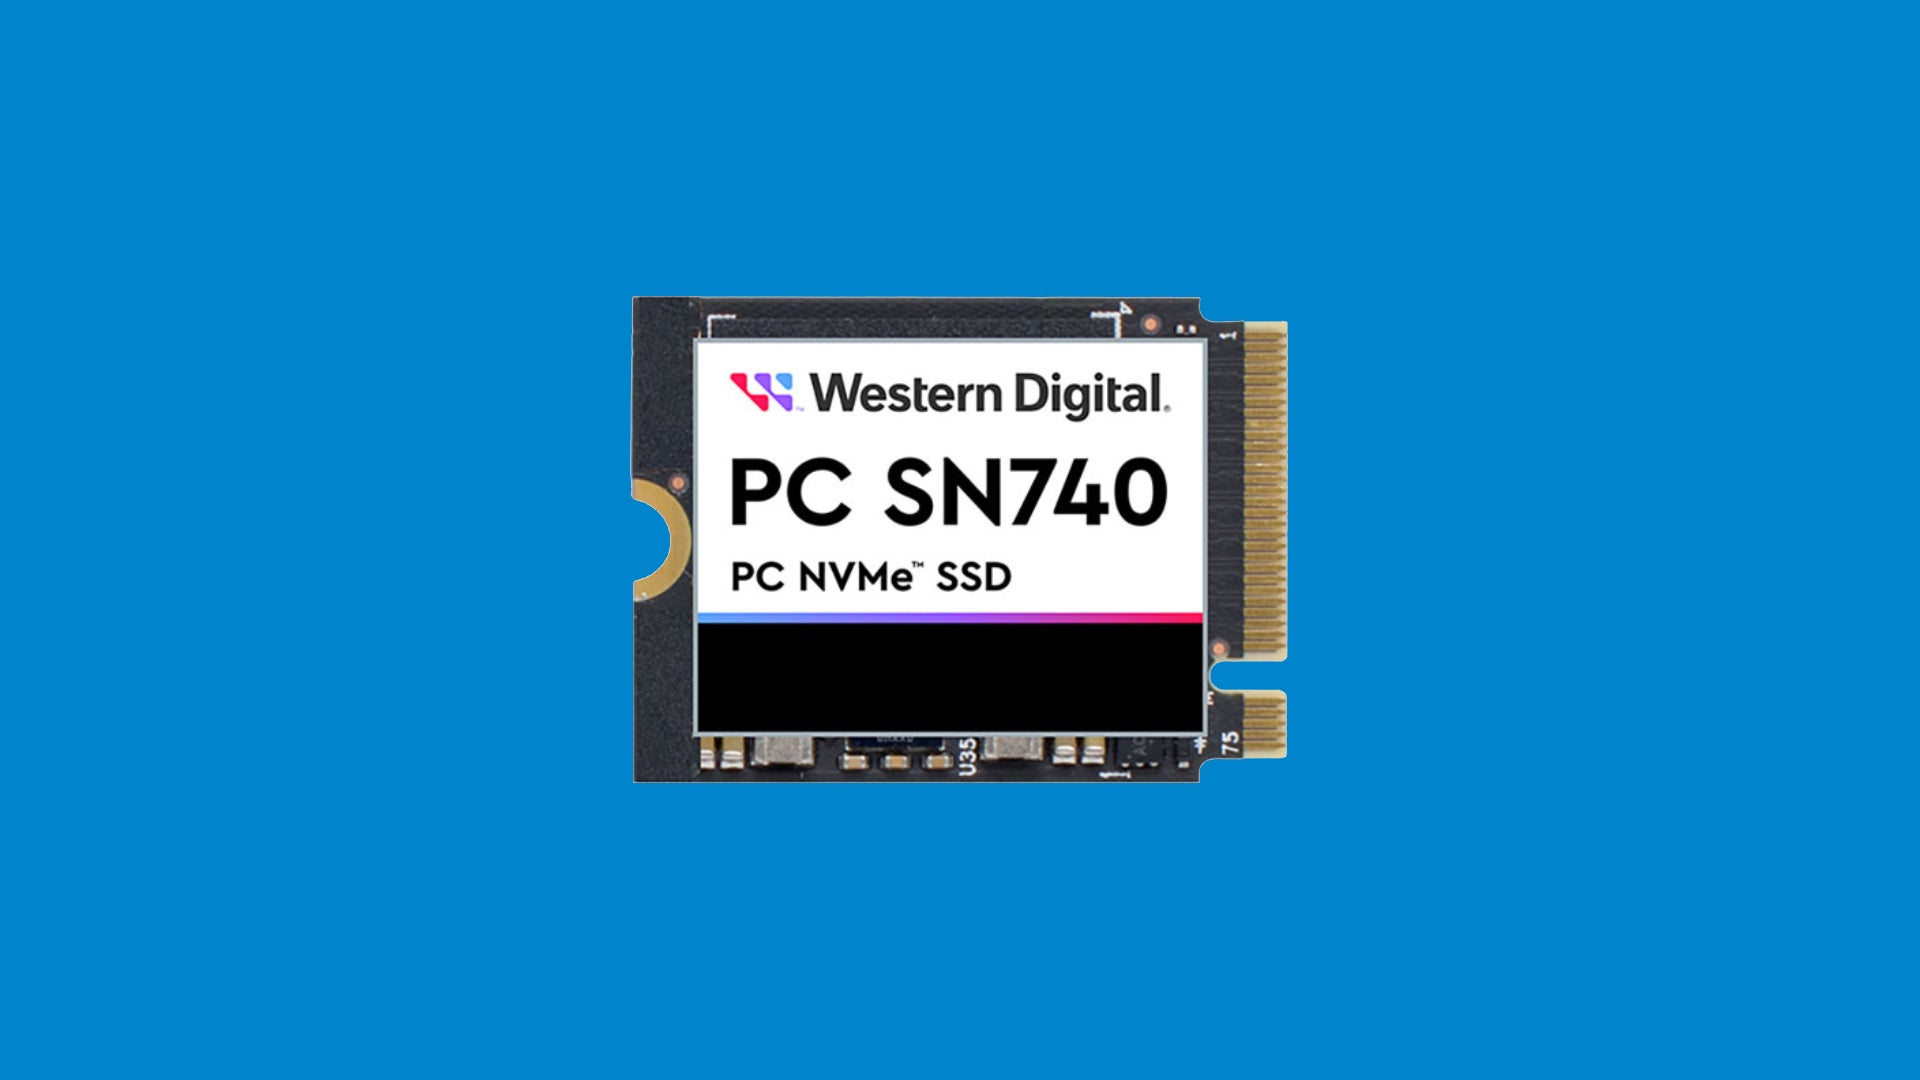 You can get the WD PC SN740 SSD for just over £81 today at Scan 